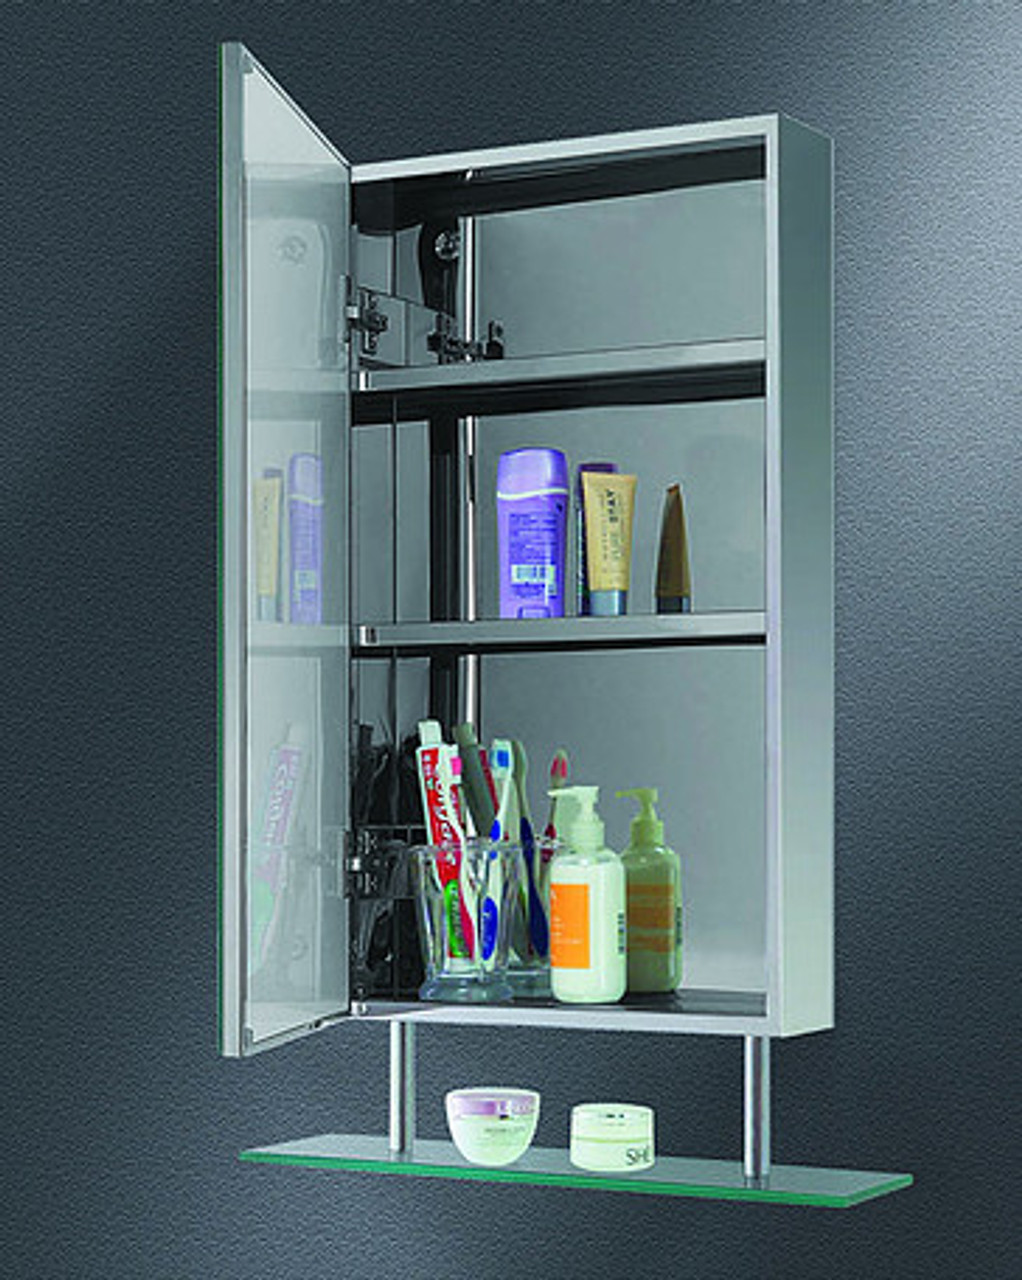 Ketcham Dual Door Medicine Cabinets Stainless Steel Series with Suspended Shelf